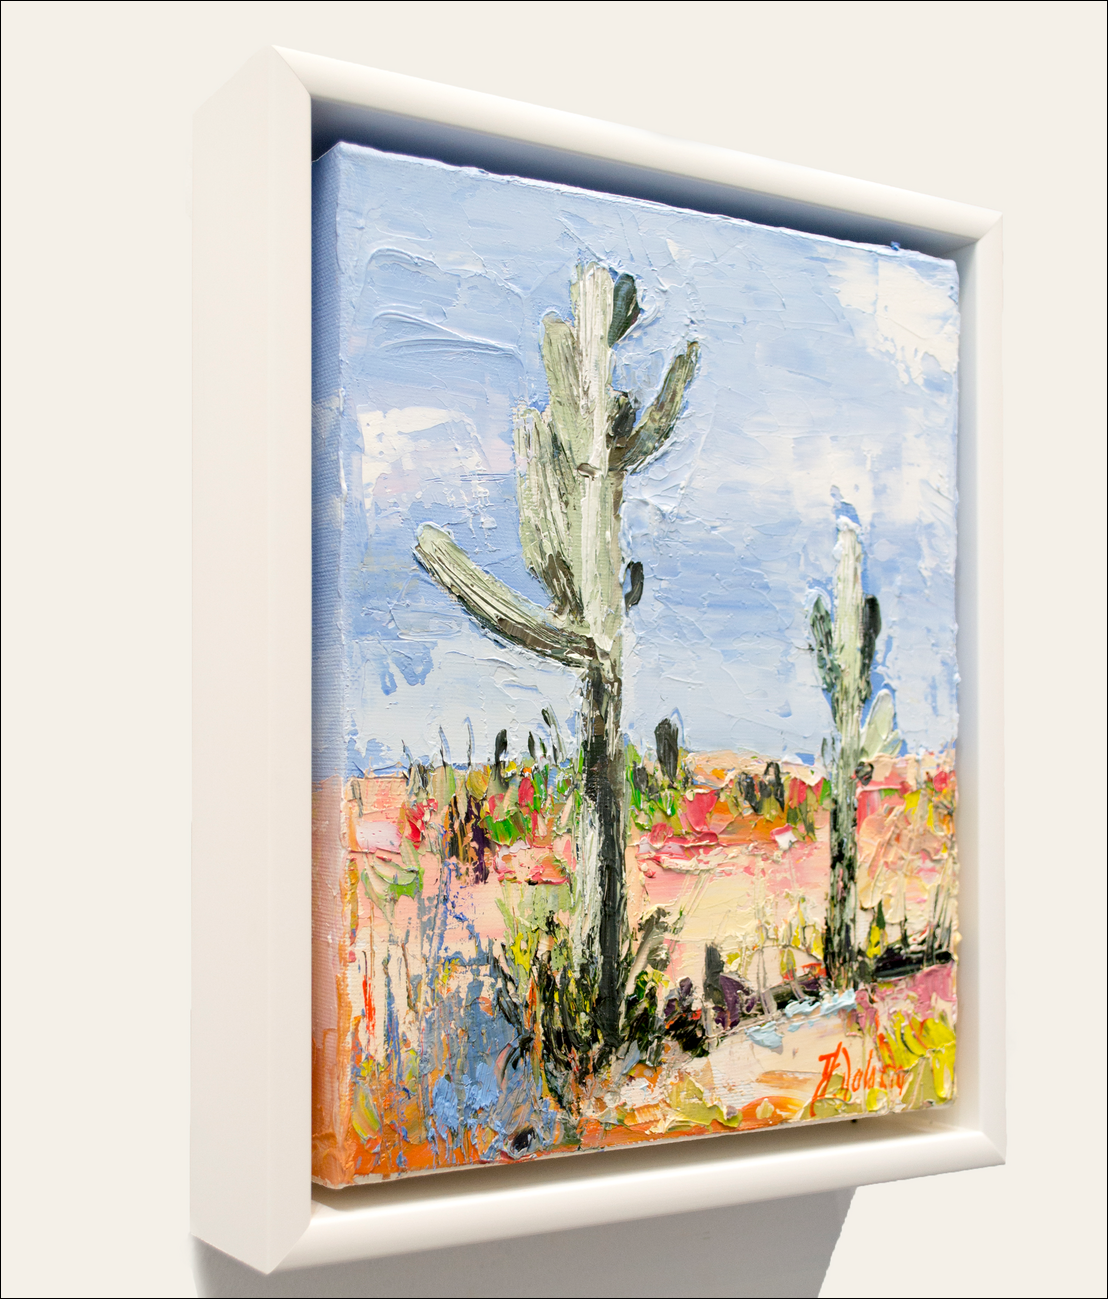 Framed Side View Of Landscape Painting "Desert Off Track Scottsdale Arizona 1" By Judith Dalozzo